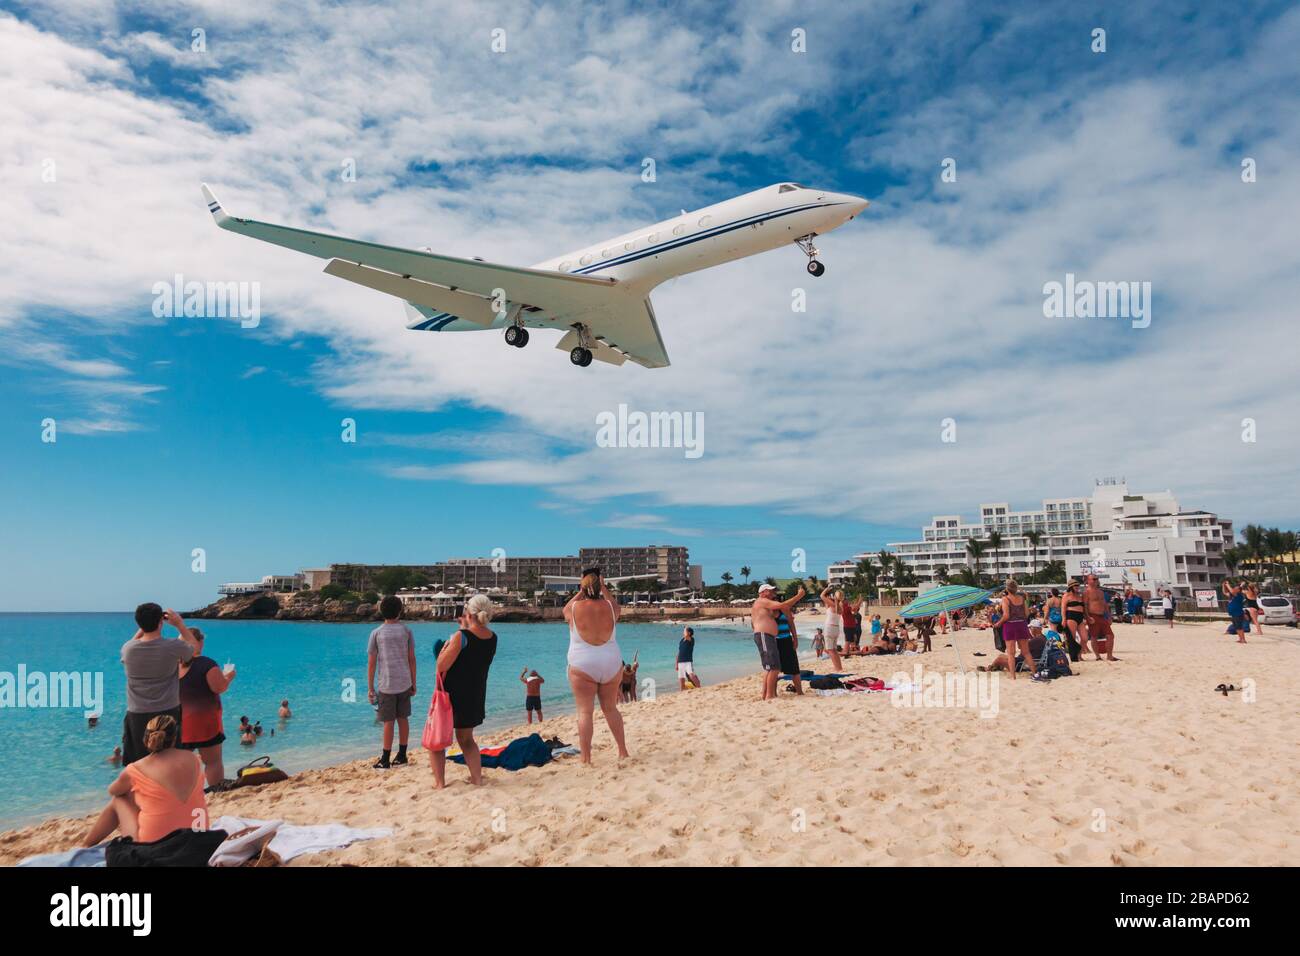 A Gulfstream private jet flies over tourists on Maho Beach, St. Maarten Stock Photo